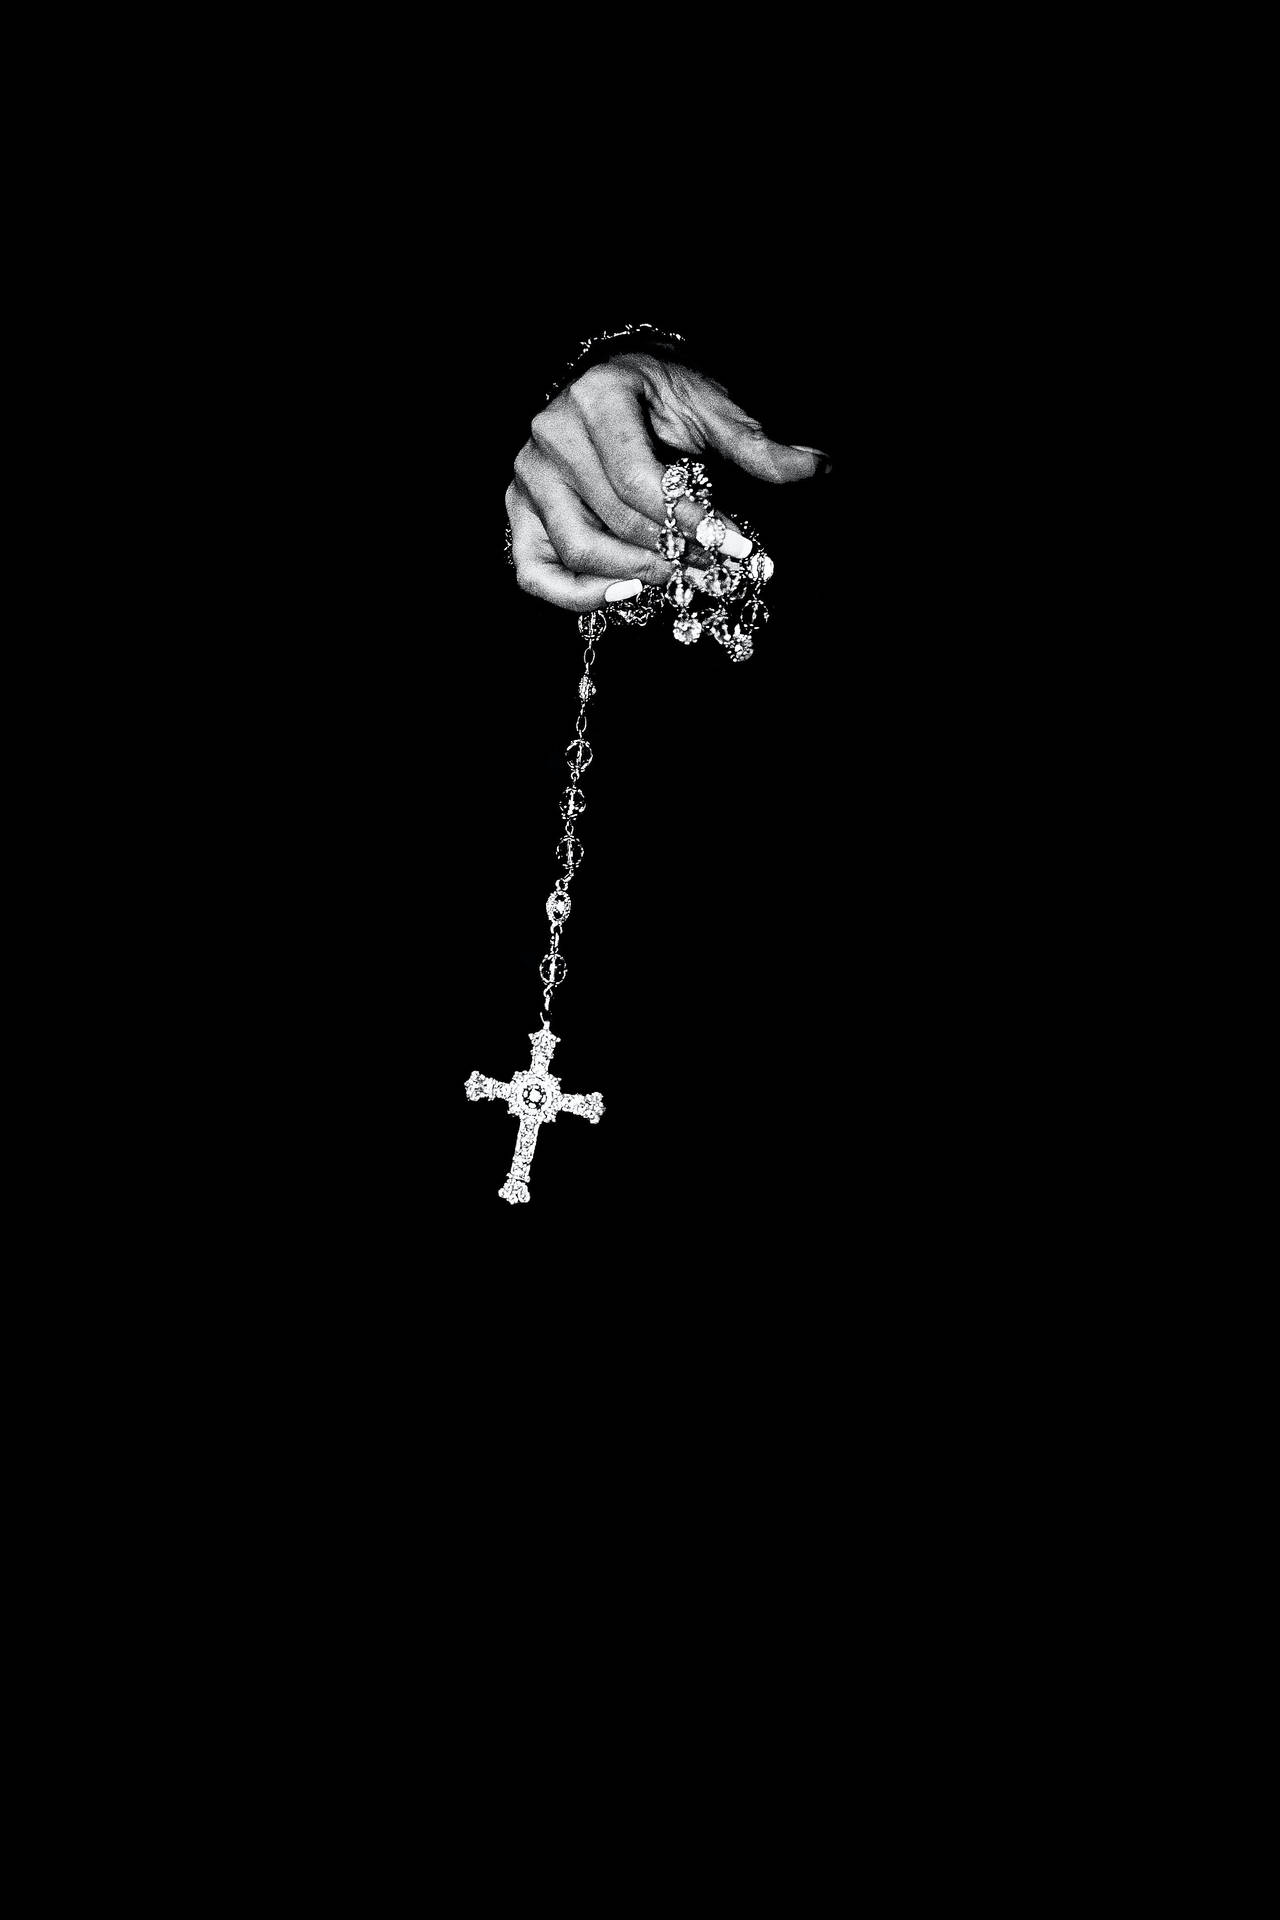 Plain Black Iphone Rosary Picture